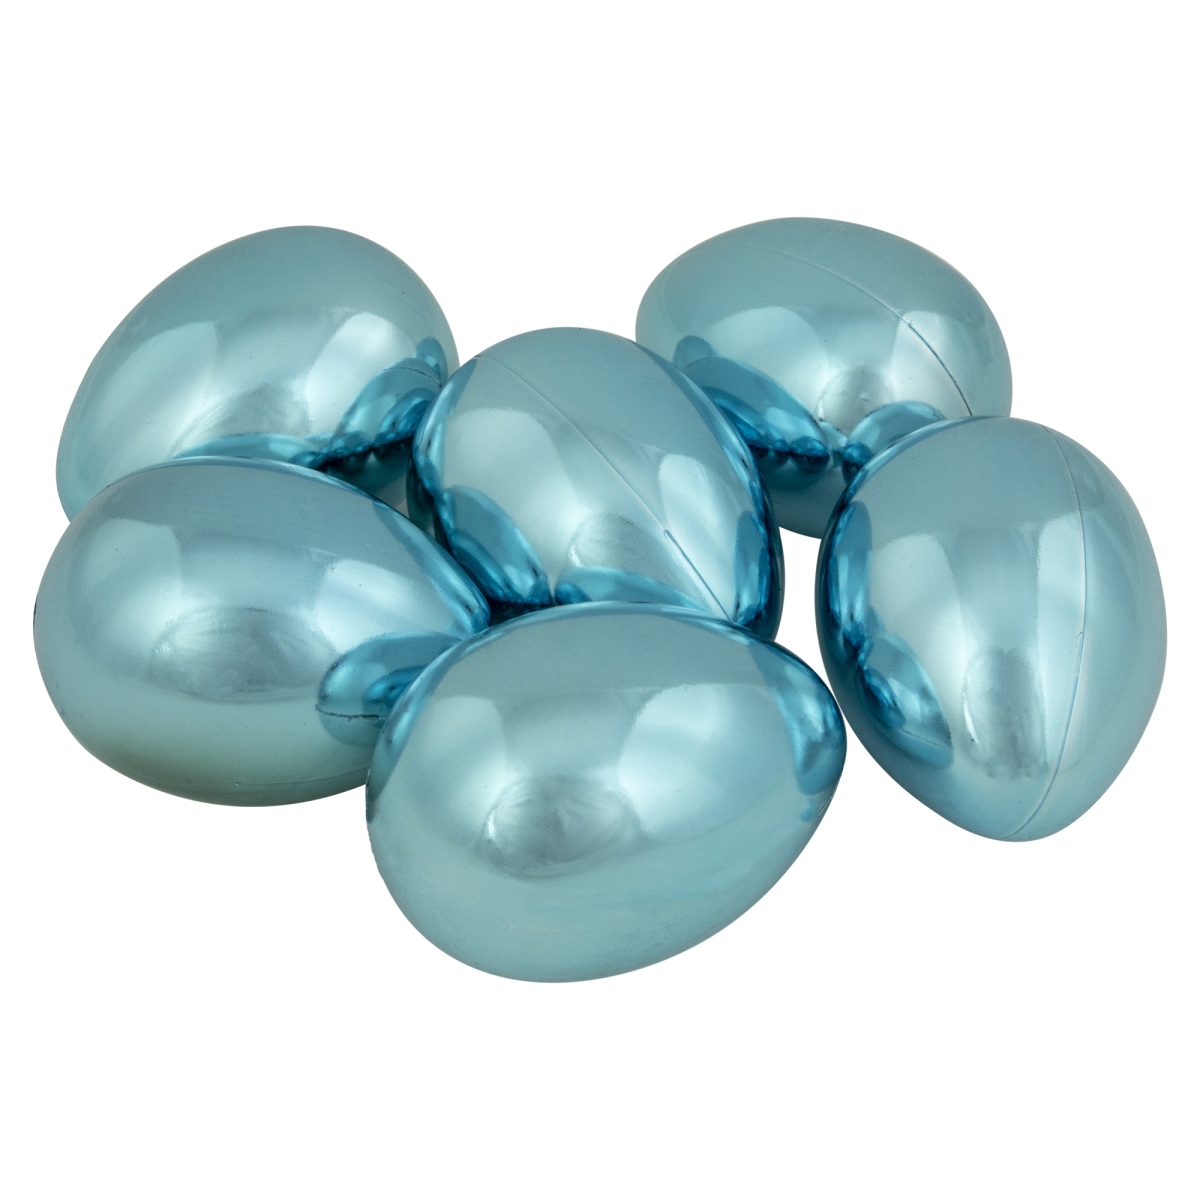 Picture of Northlight 35251282 3.5 in. Medium Size Easter Egg Decorations, Metallic Blue - Set of 6